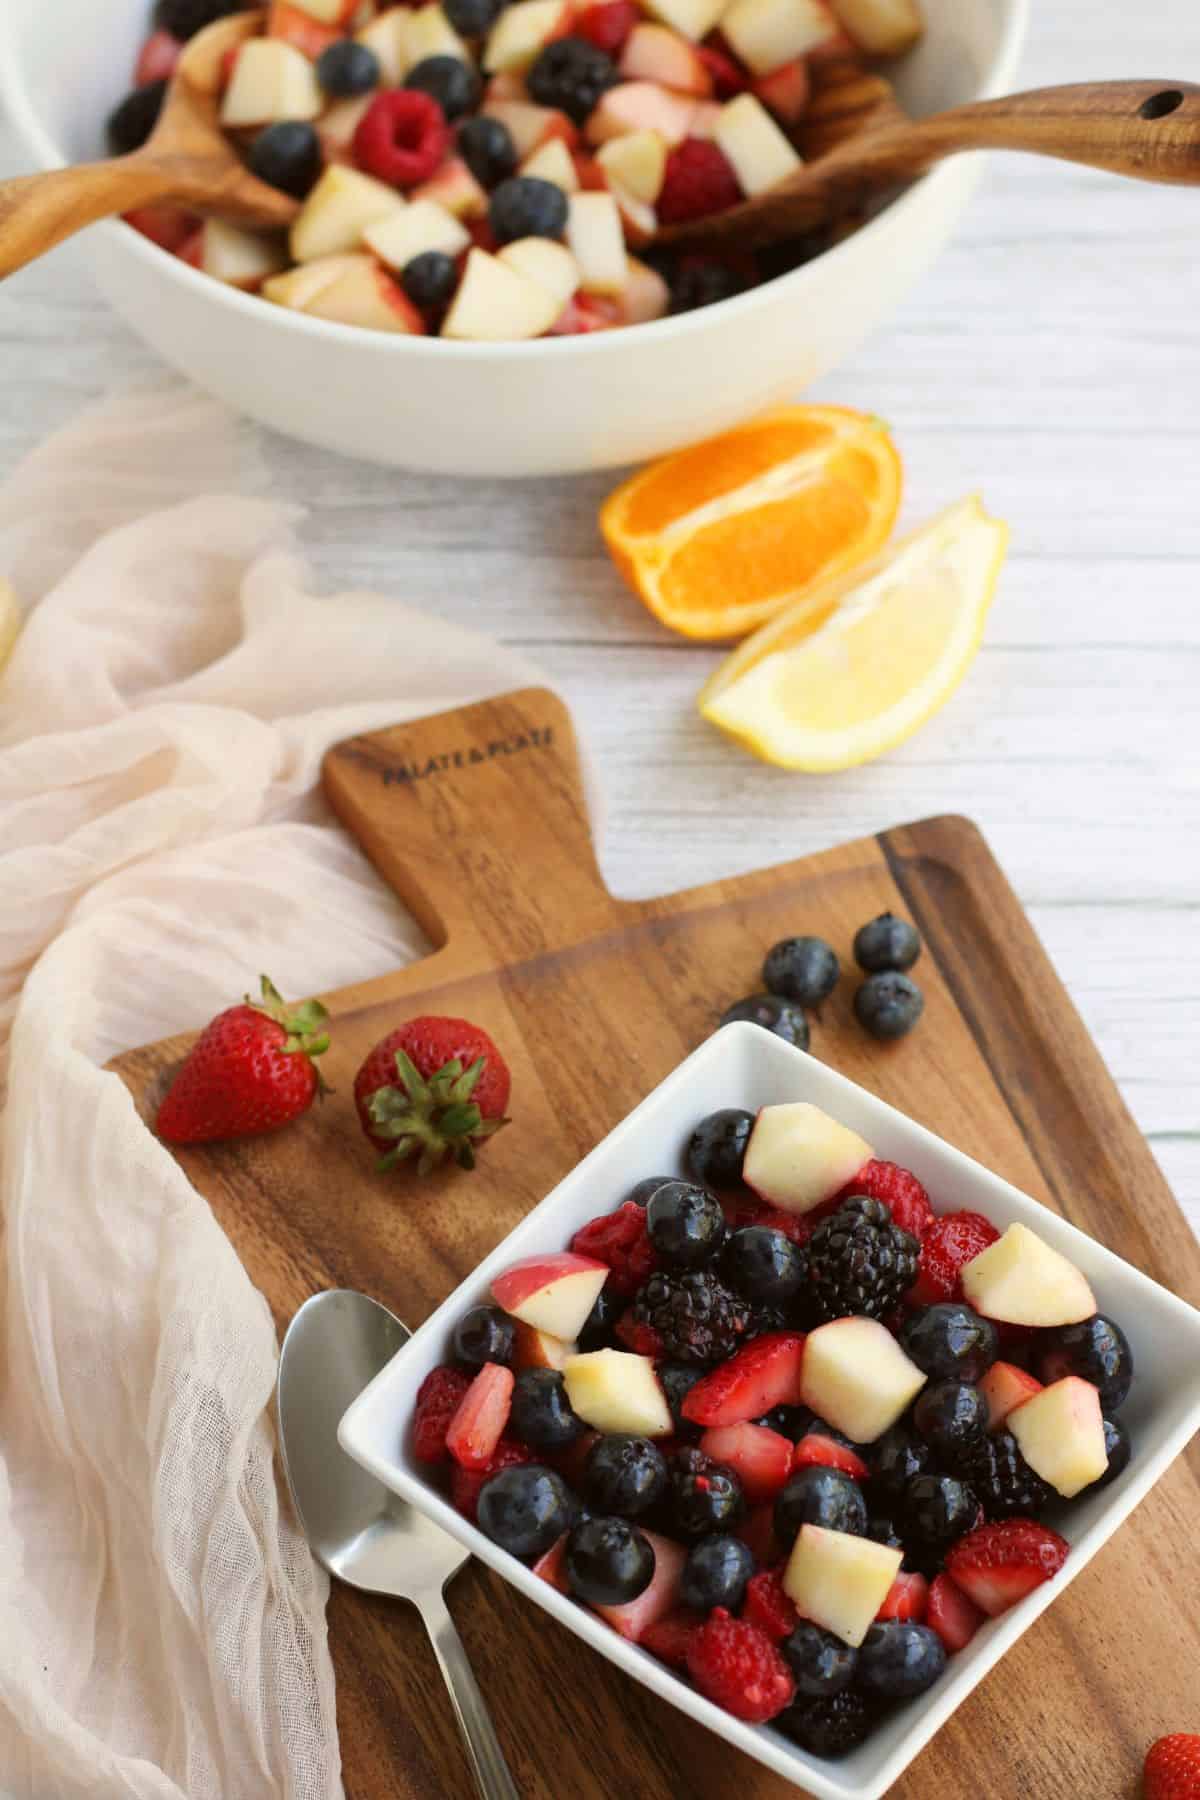 An overhead view of a square bowl filled with fruit on a wooden board with a peeled orange behind the cutting board.